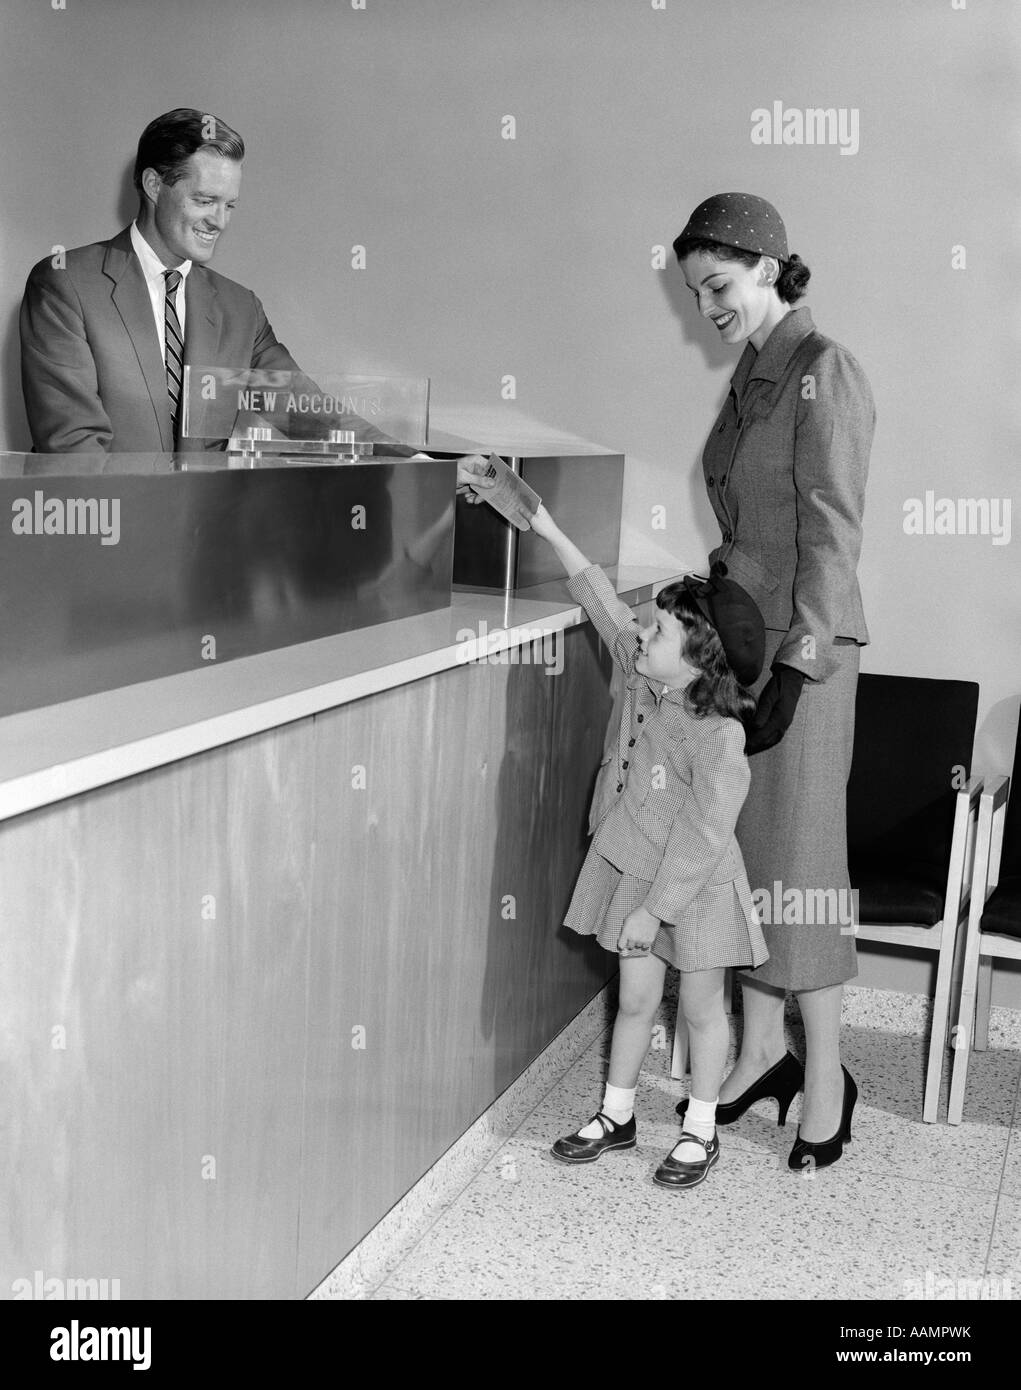 1950s MAN TELLER NEW ACCOUNTS IN BANK MOTHER WOMAN WITH LITTLE GIRL DAUGHTER HANDS PASSBOOK Stock Photo